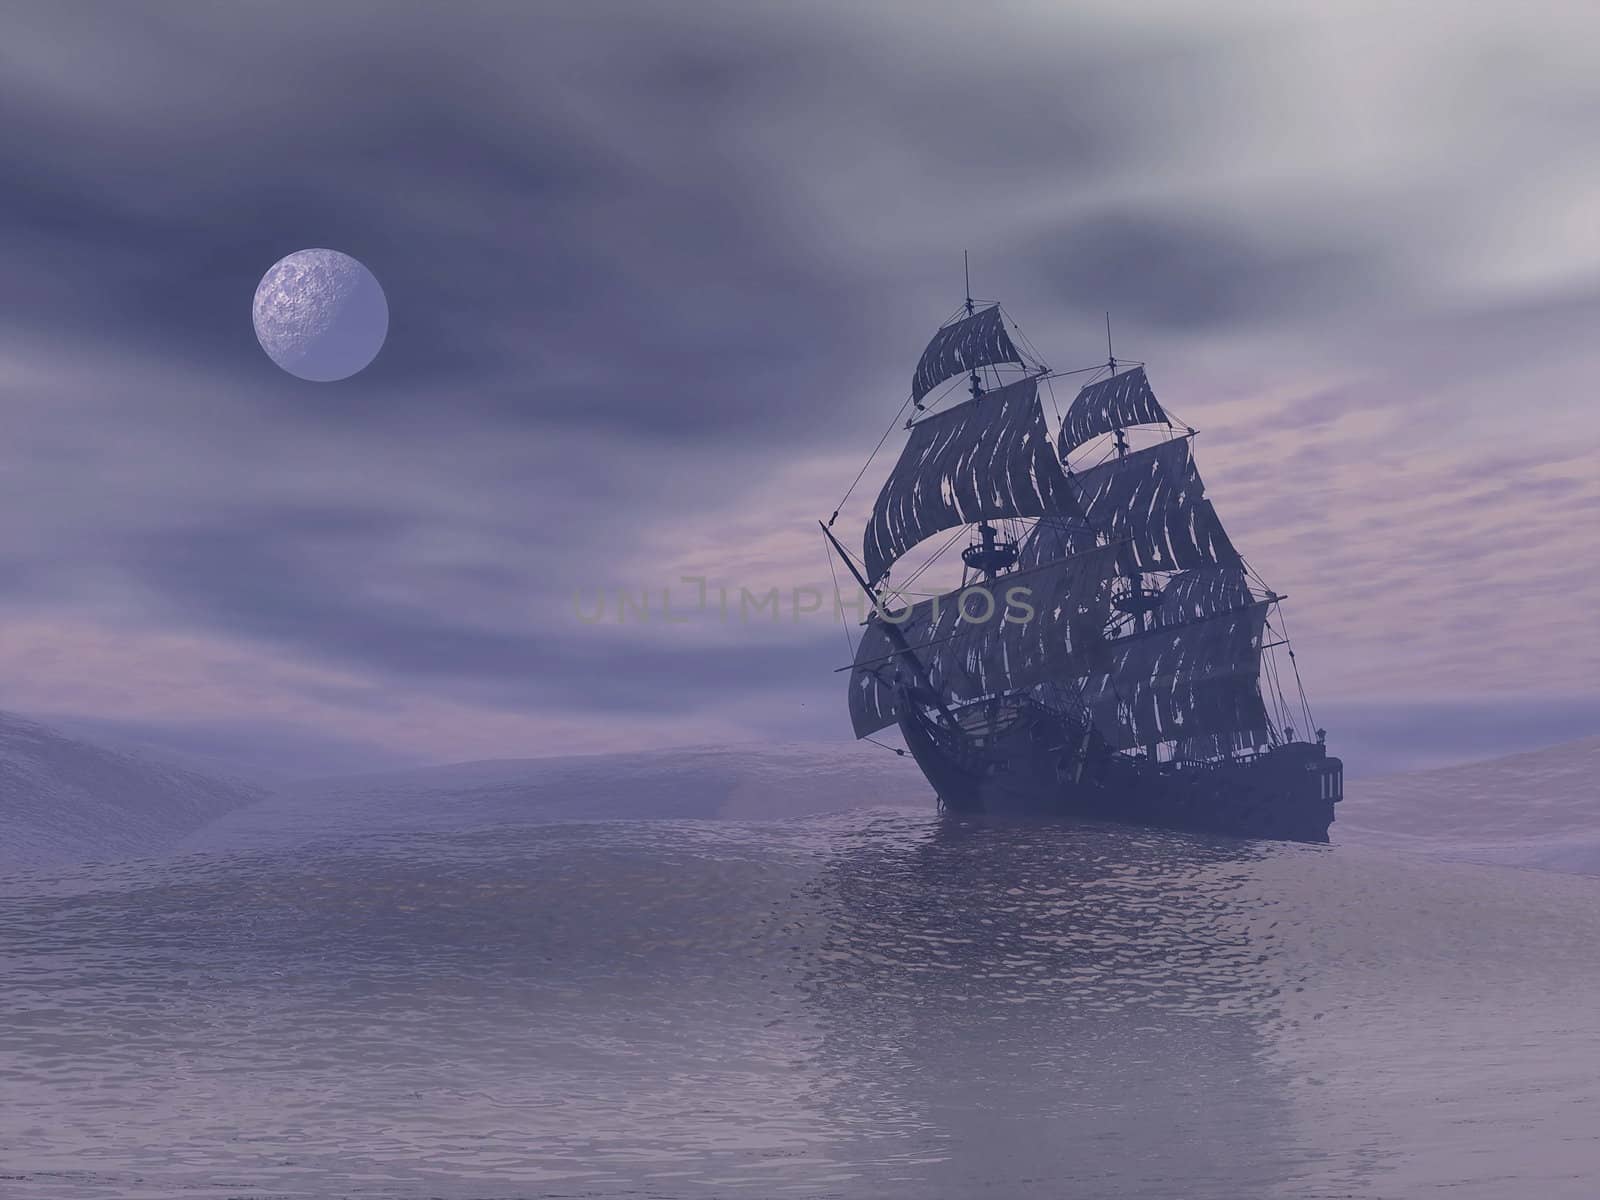 Ghost boat by night - 3D render by Elenaphotos21